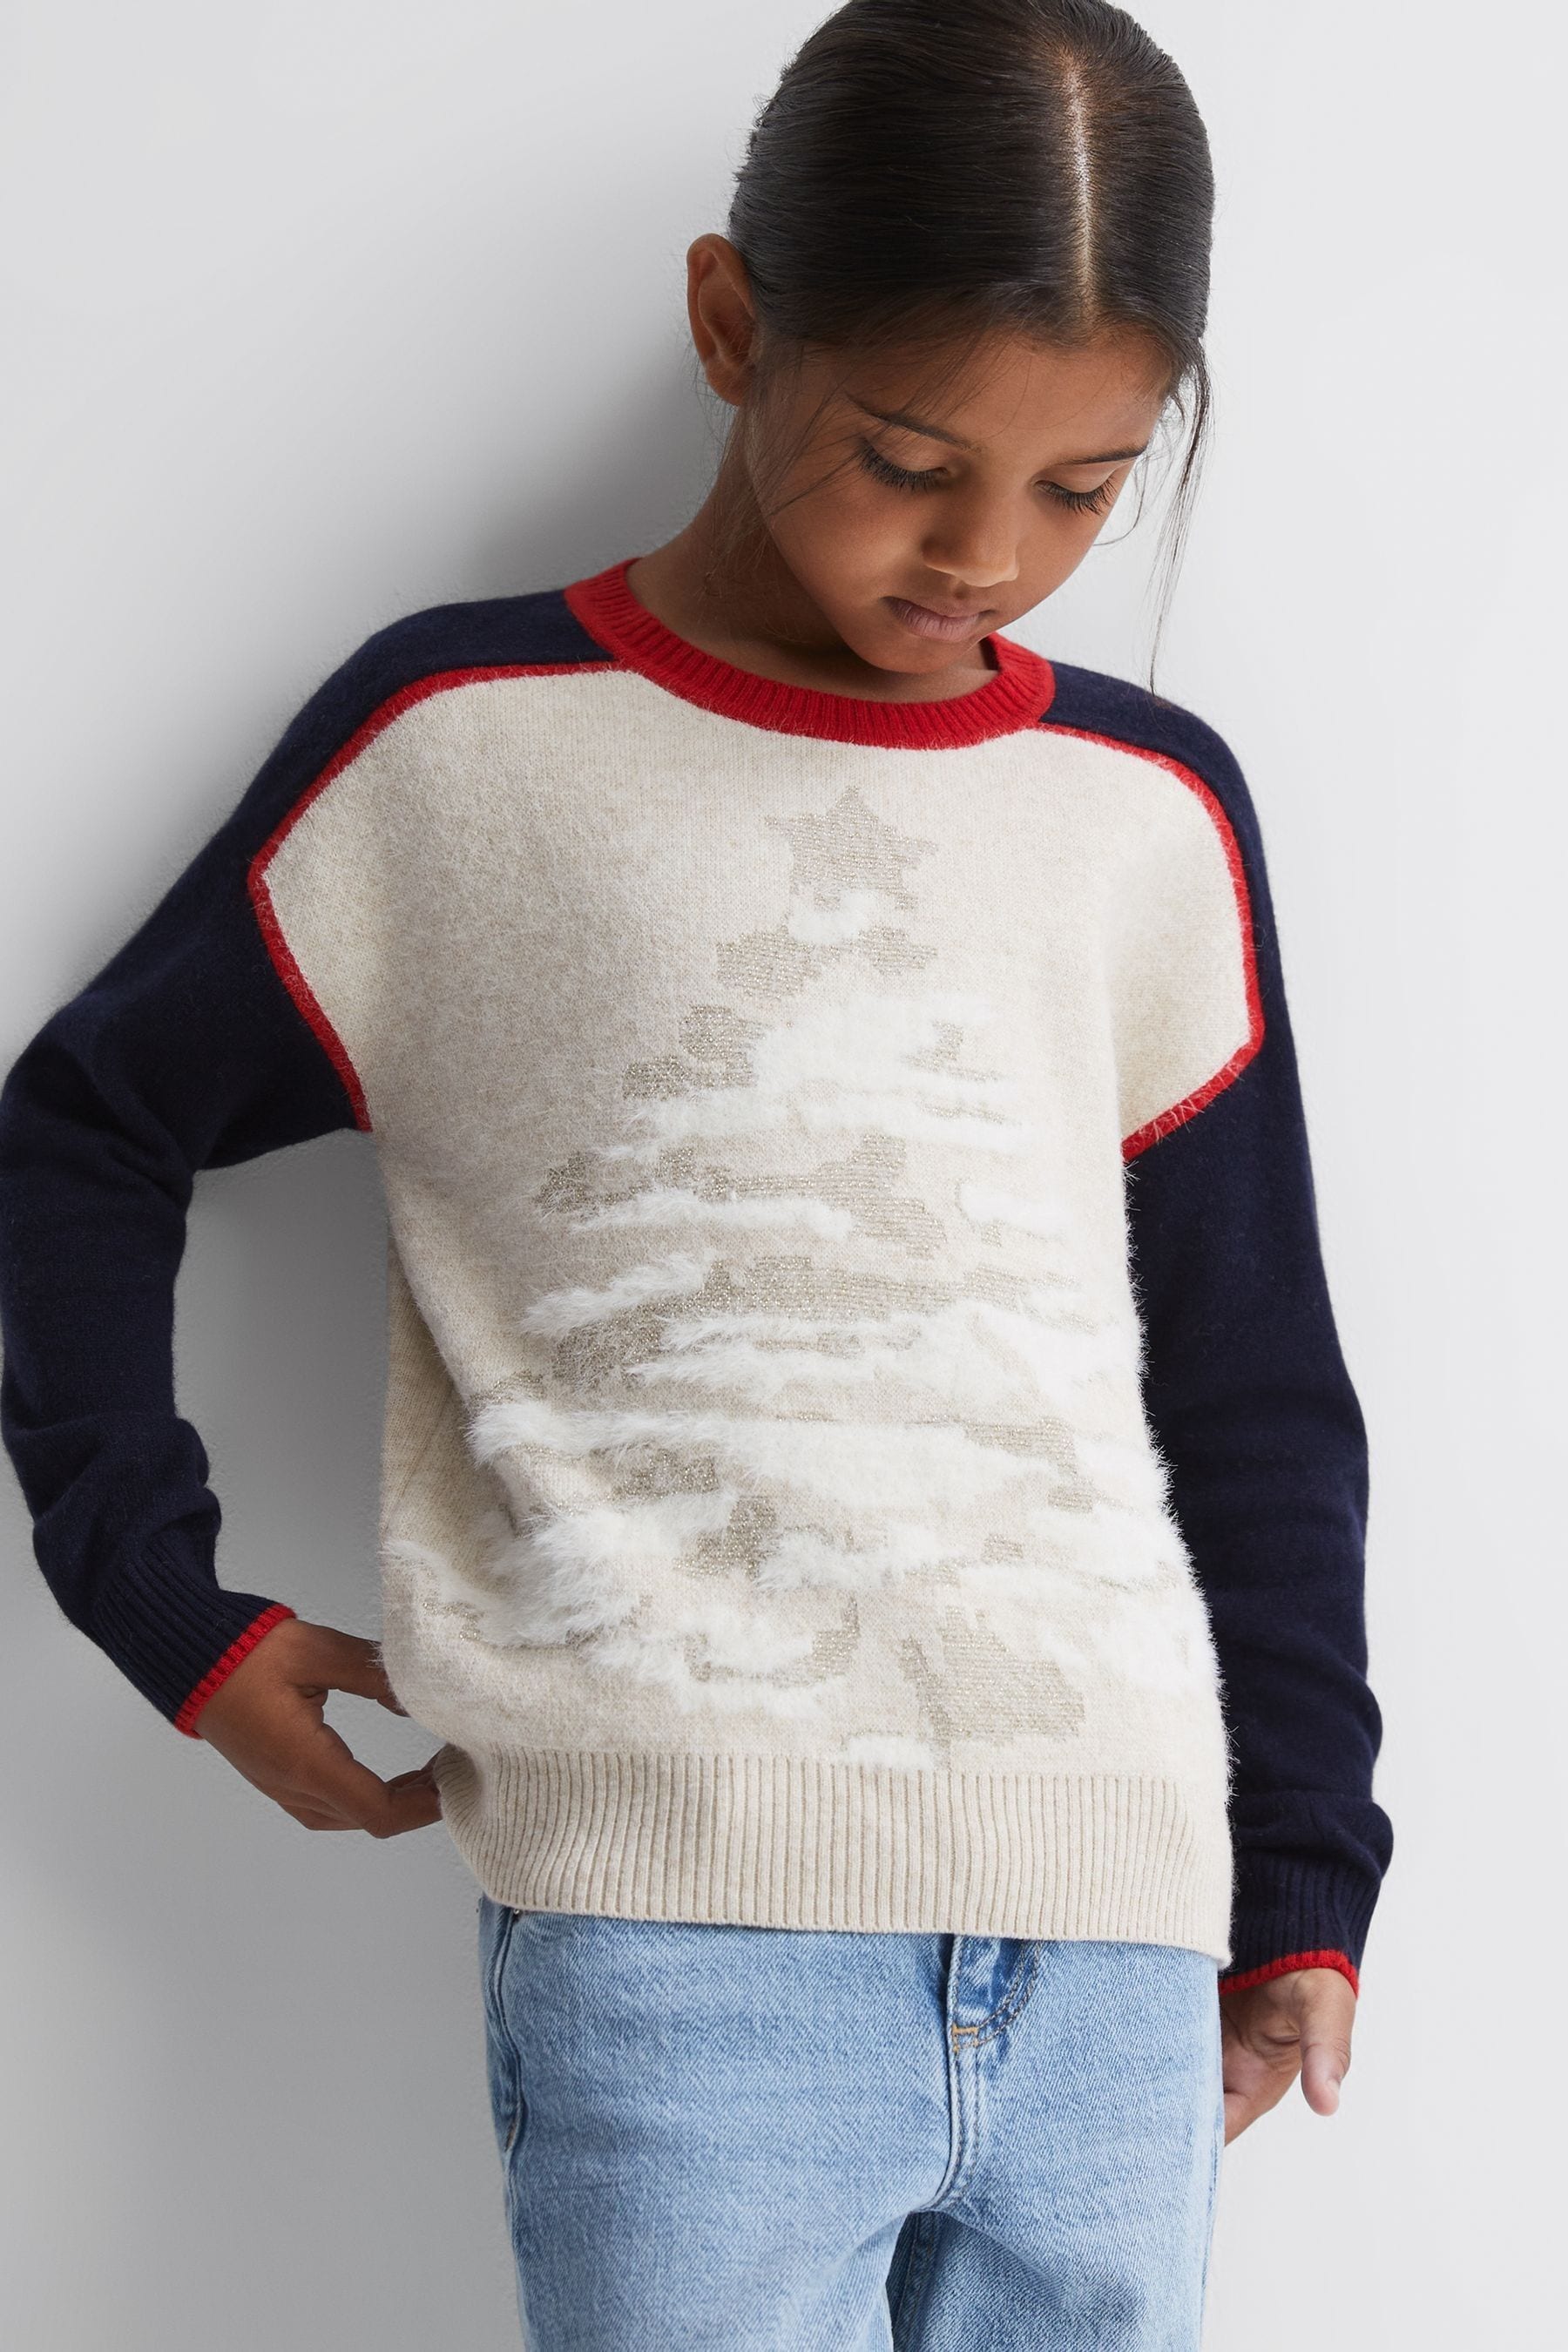 Reiss Kids' Tilly - Blue Junior Casual Knitted Festive Jumper, Age 4-5 Years